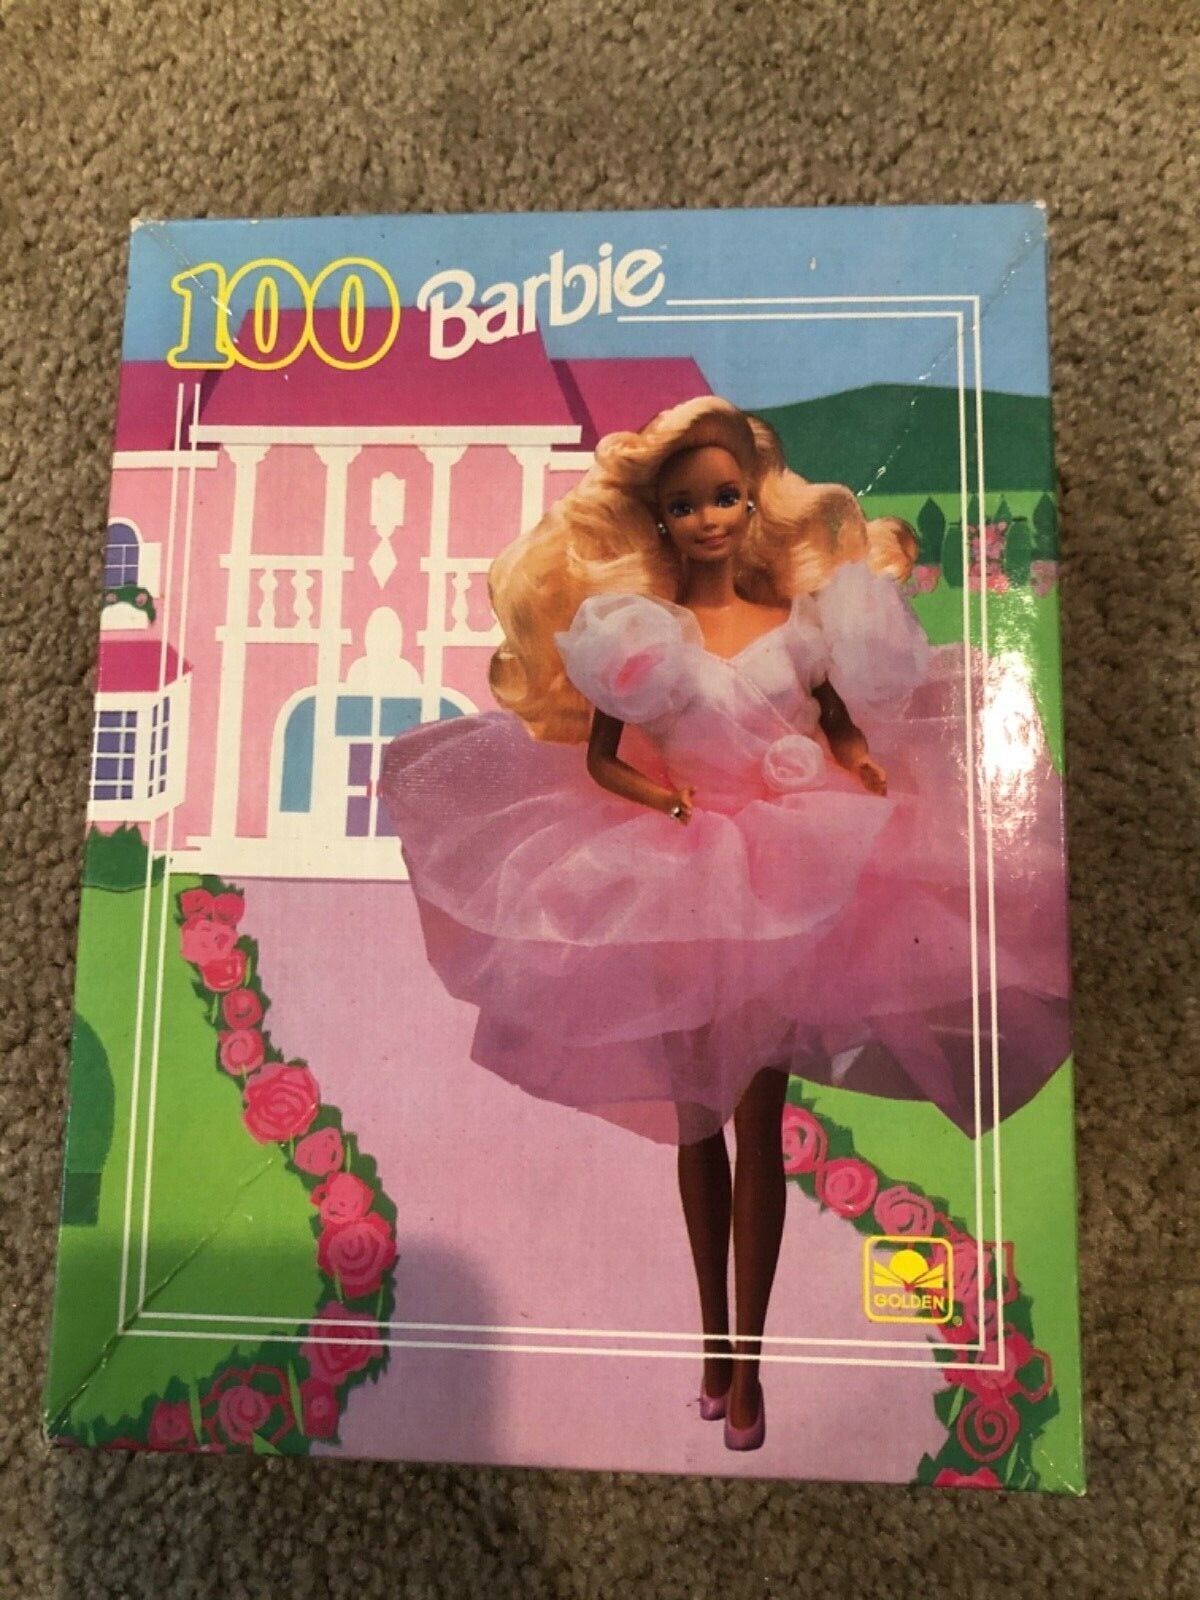 Vintage 1991 Barbie Jigsaw Puzzle 100 Piece by Golden - GUC In Box 11.5x15 - $11.30